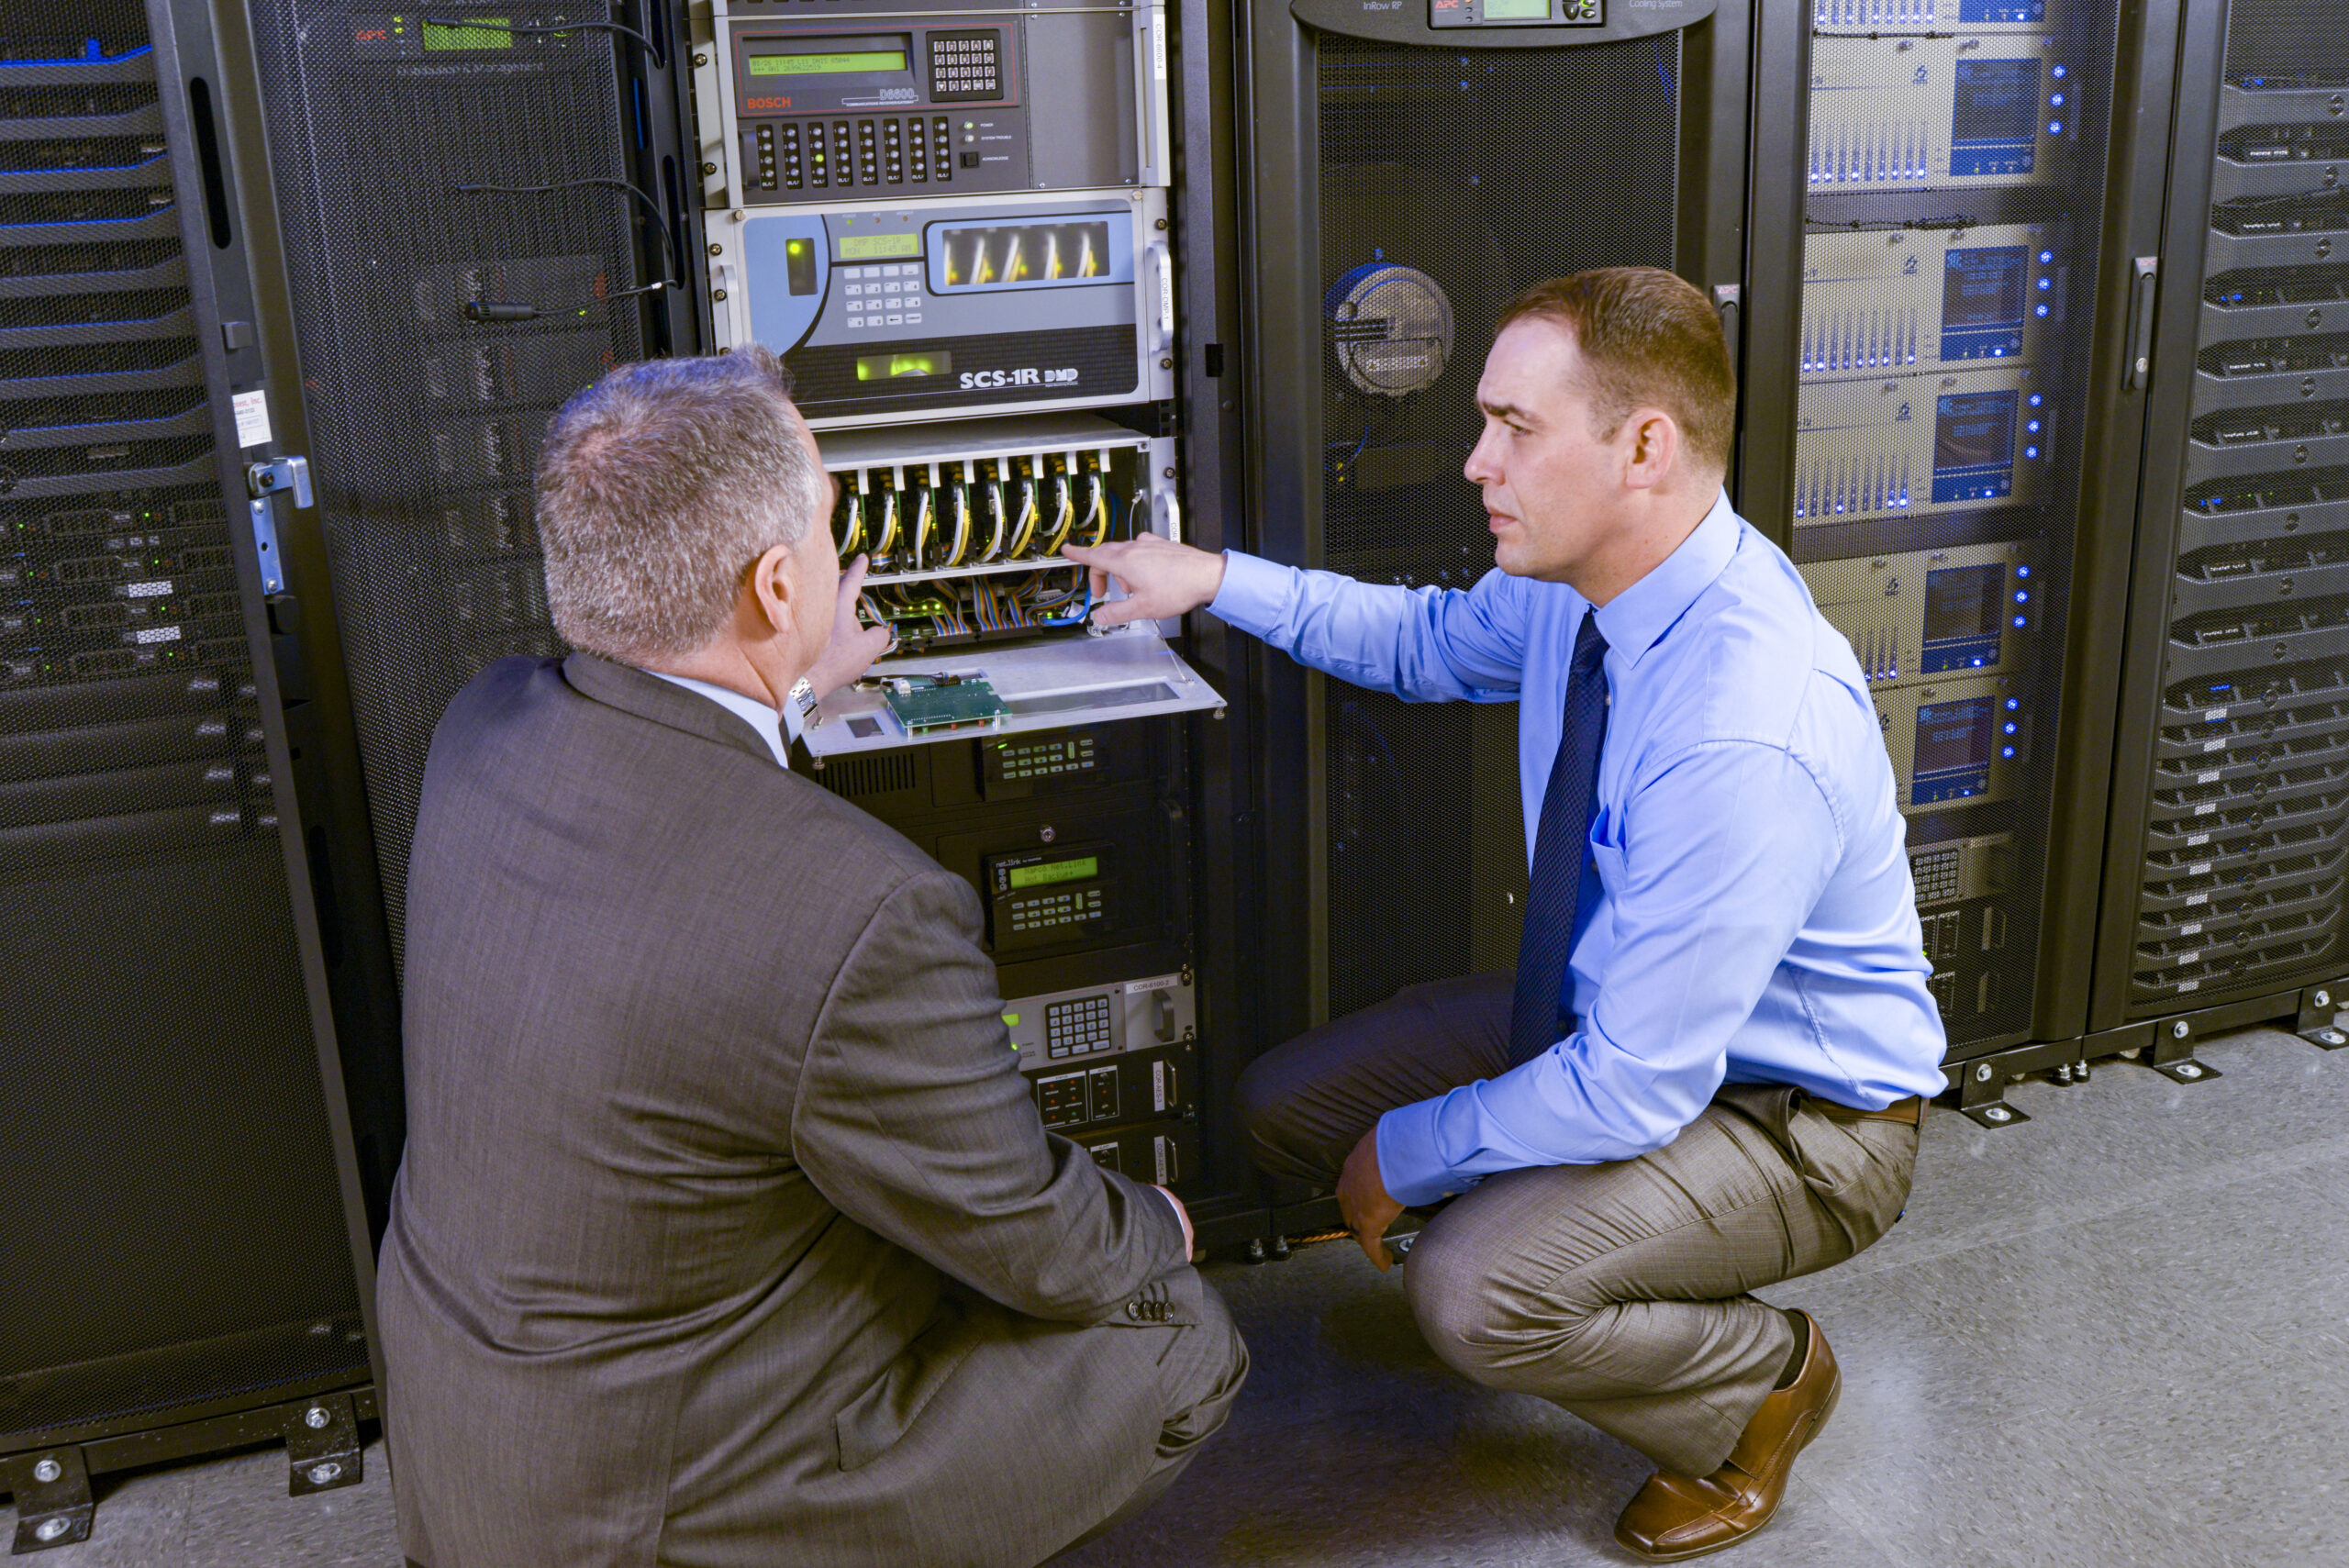 Two men discuss next to a computer.